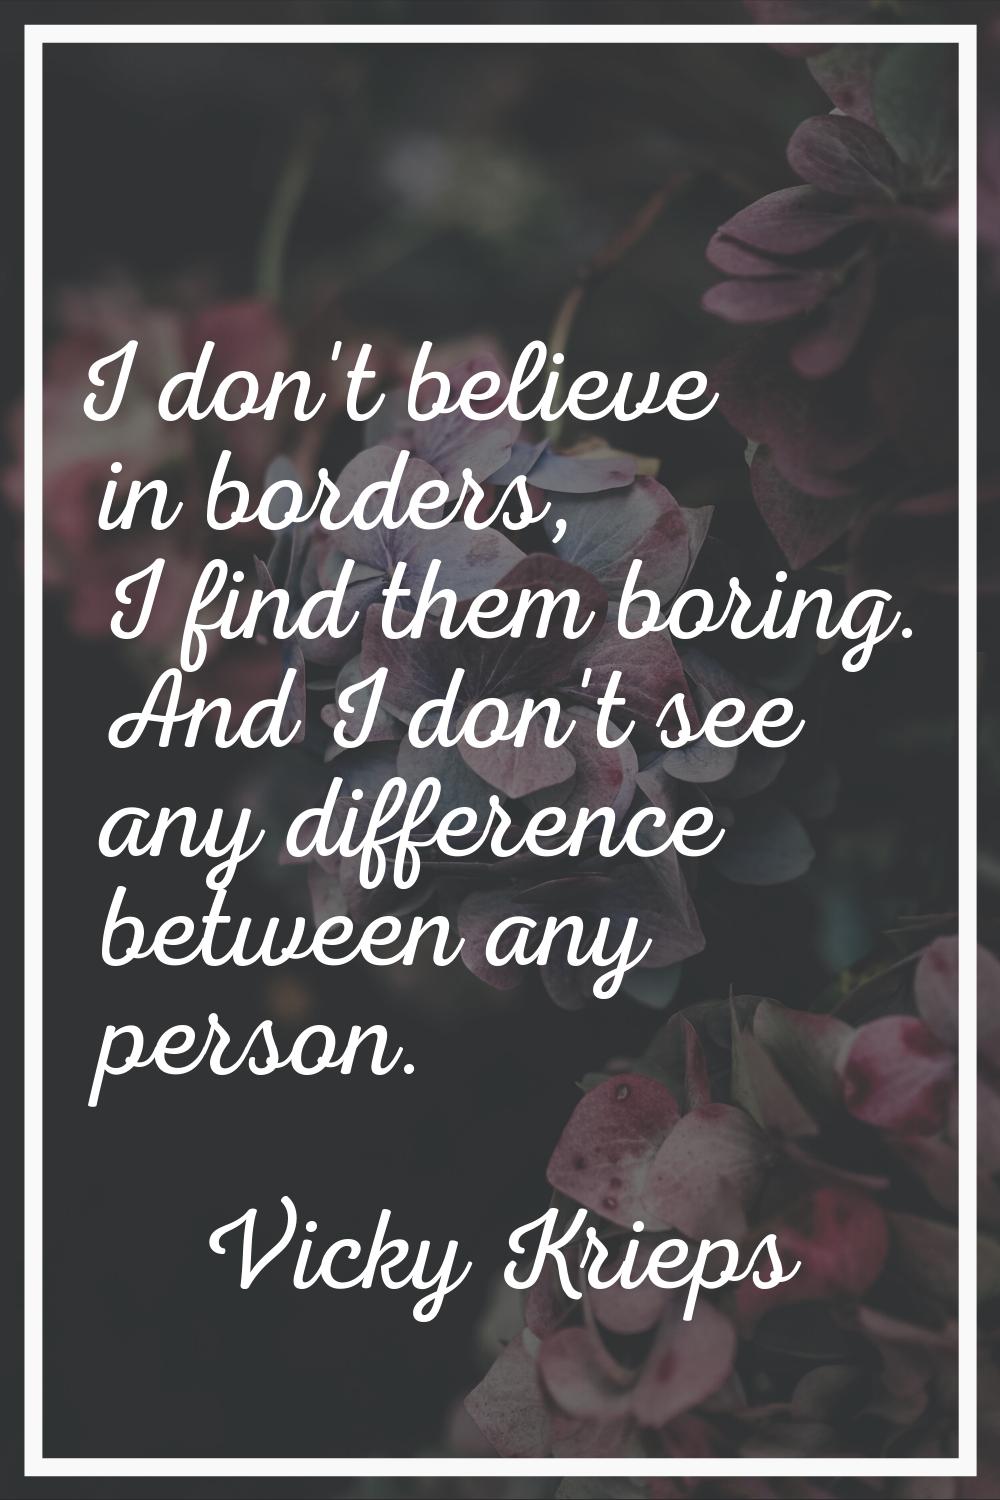 I don't believe in borders, I find them boring. And I don't see any difference between any person.